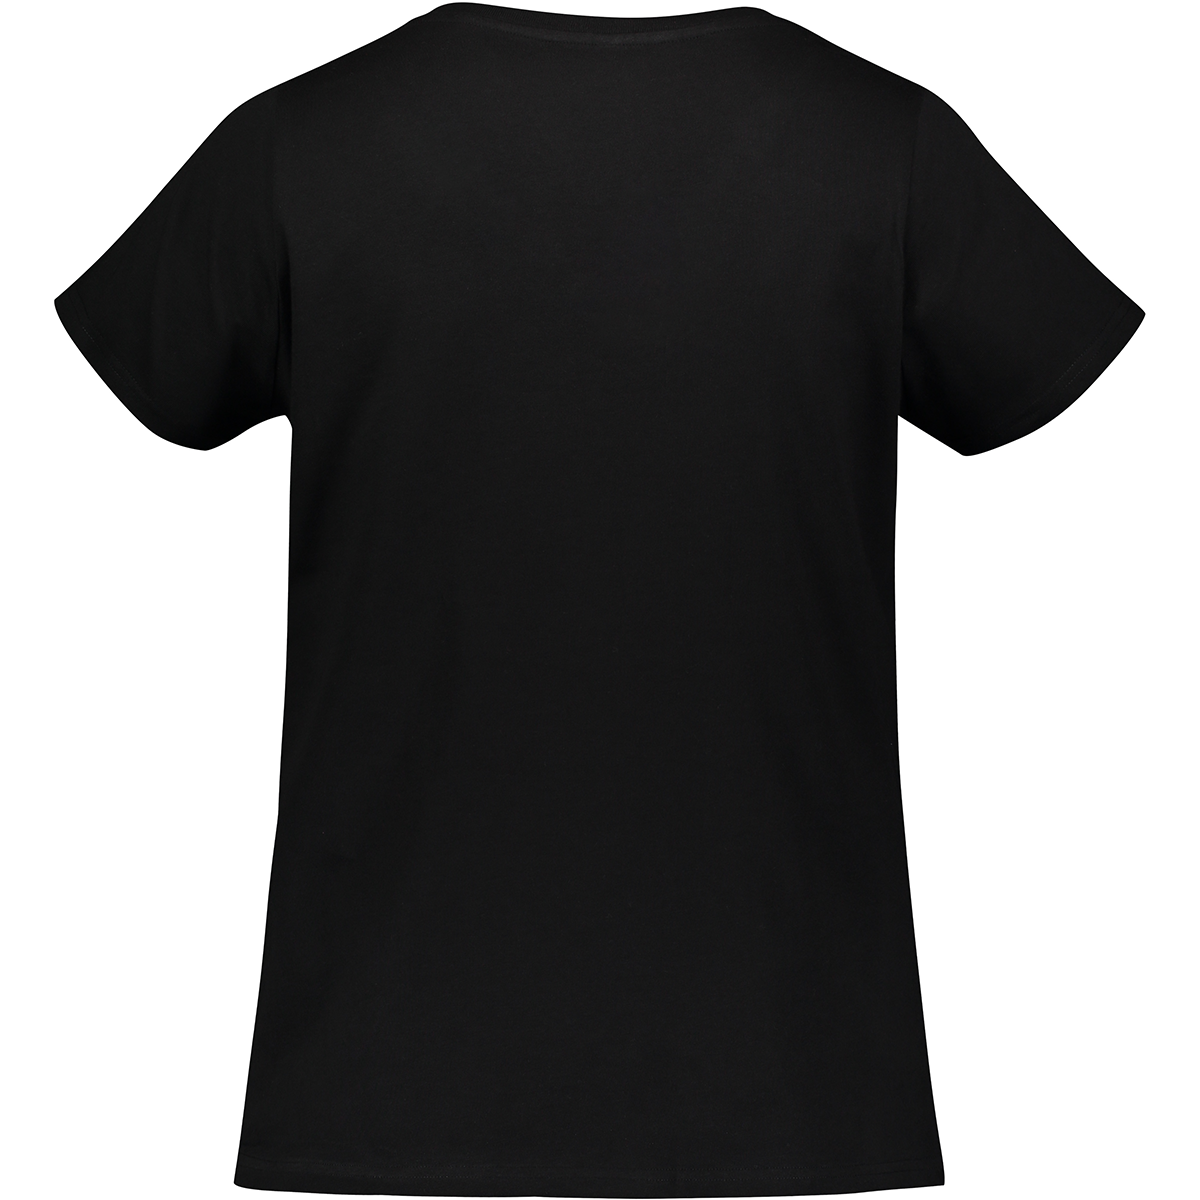 Inktastic Civil Engineers Road To Happiness Women's Plus Size V-Neck T-Shirt - image 4 of 4